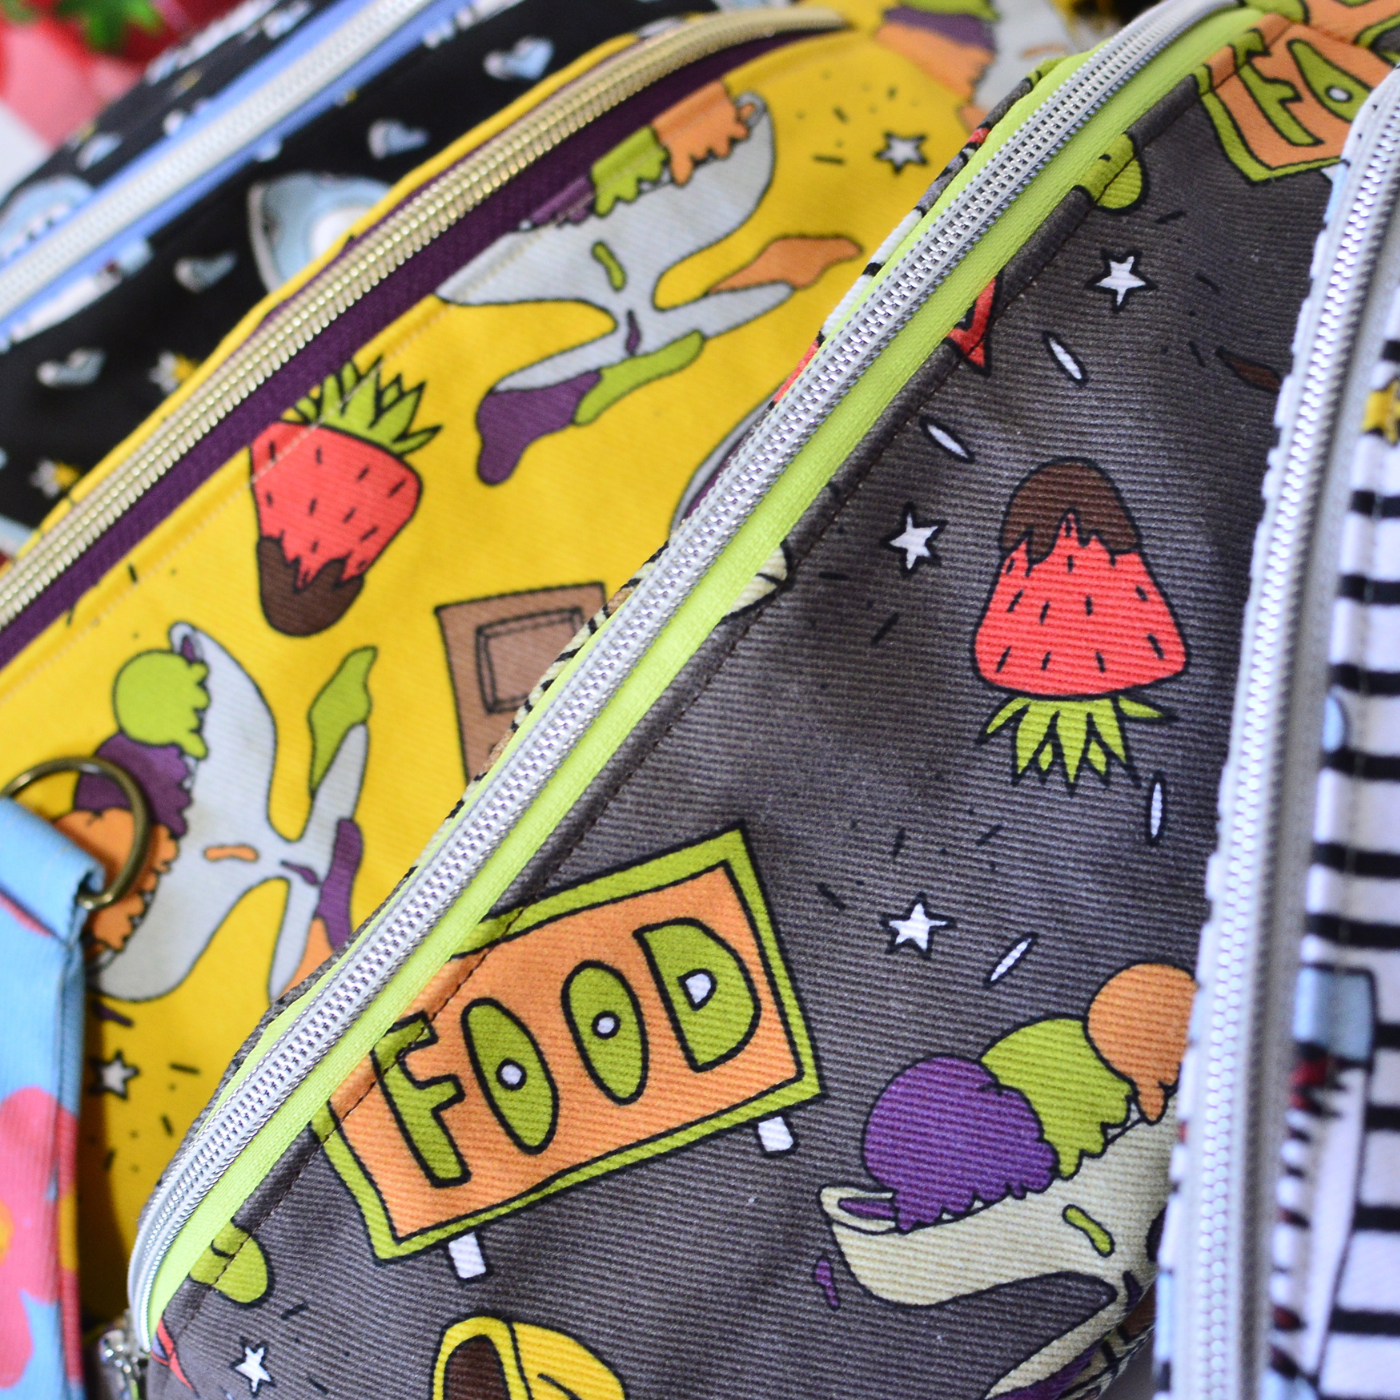 Close up of four small zipper pouches. The bag on the far left has a black background and light blue sharks with their mouths open, surrounded by small light blue hearts. The next two bags have designs of chocolate covered strawberries, ice cream sundae bowls each with three scoops of ice cream, one orange, one purple, one green, squares of chocolate and the word FOOD spelled out as if on a road sign, one bag has a yellow background and the other bag has a gray background. The bag on the bottom right has the same open-mouthed shark design with small yellow stars and a black-and-white striped background.